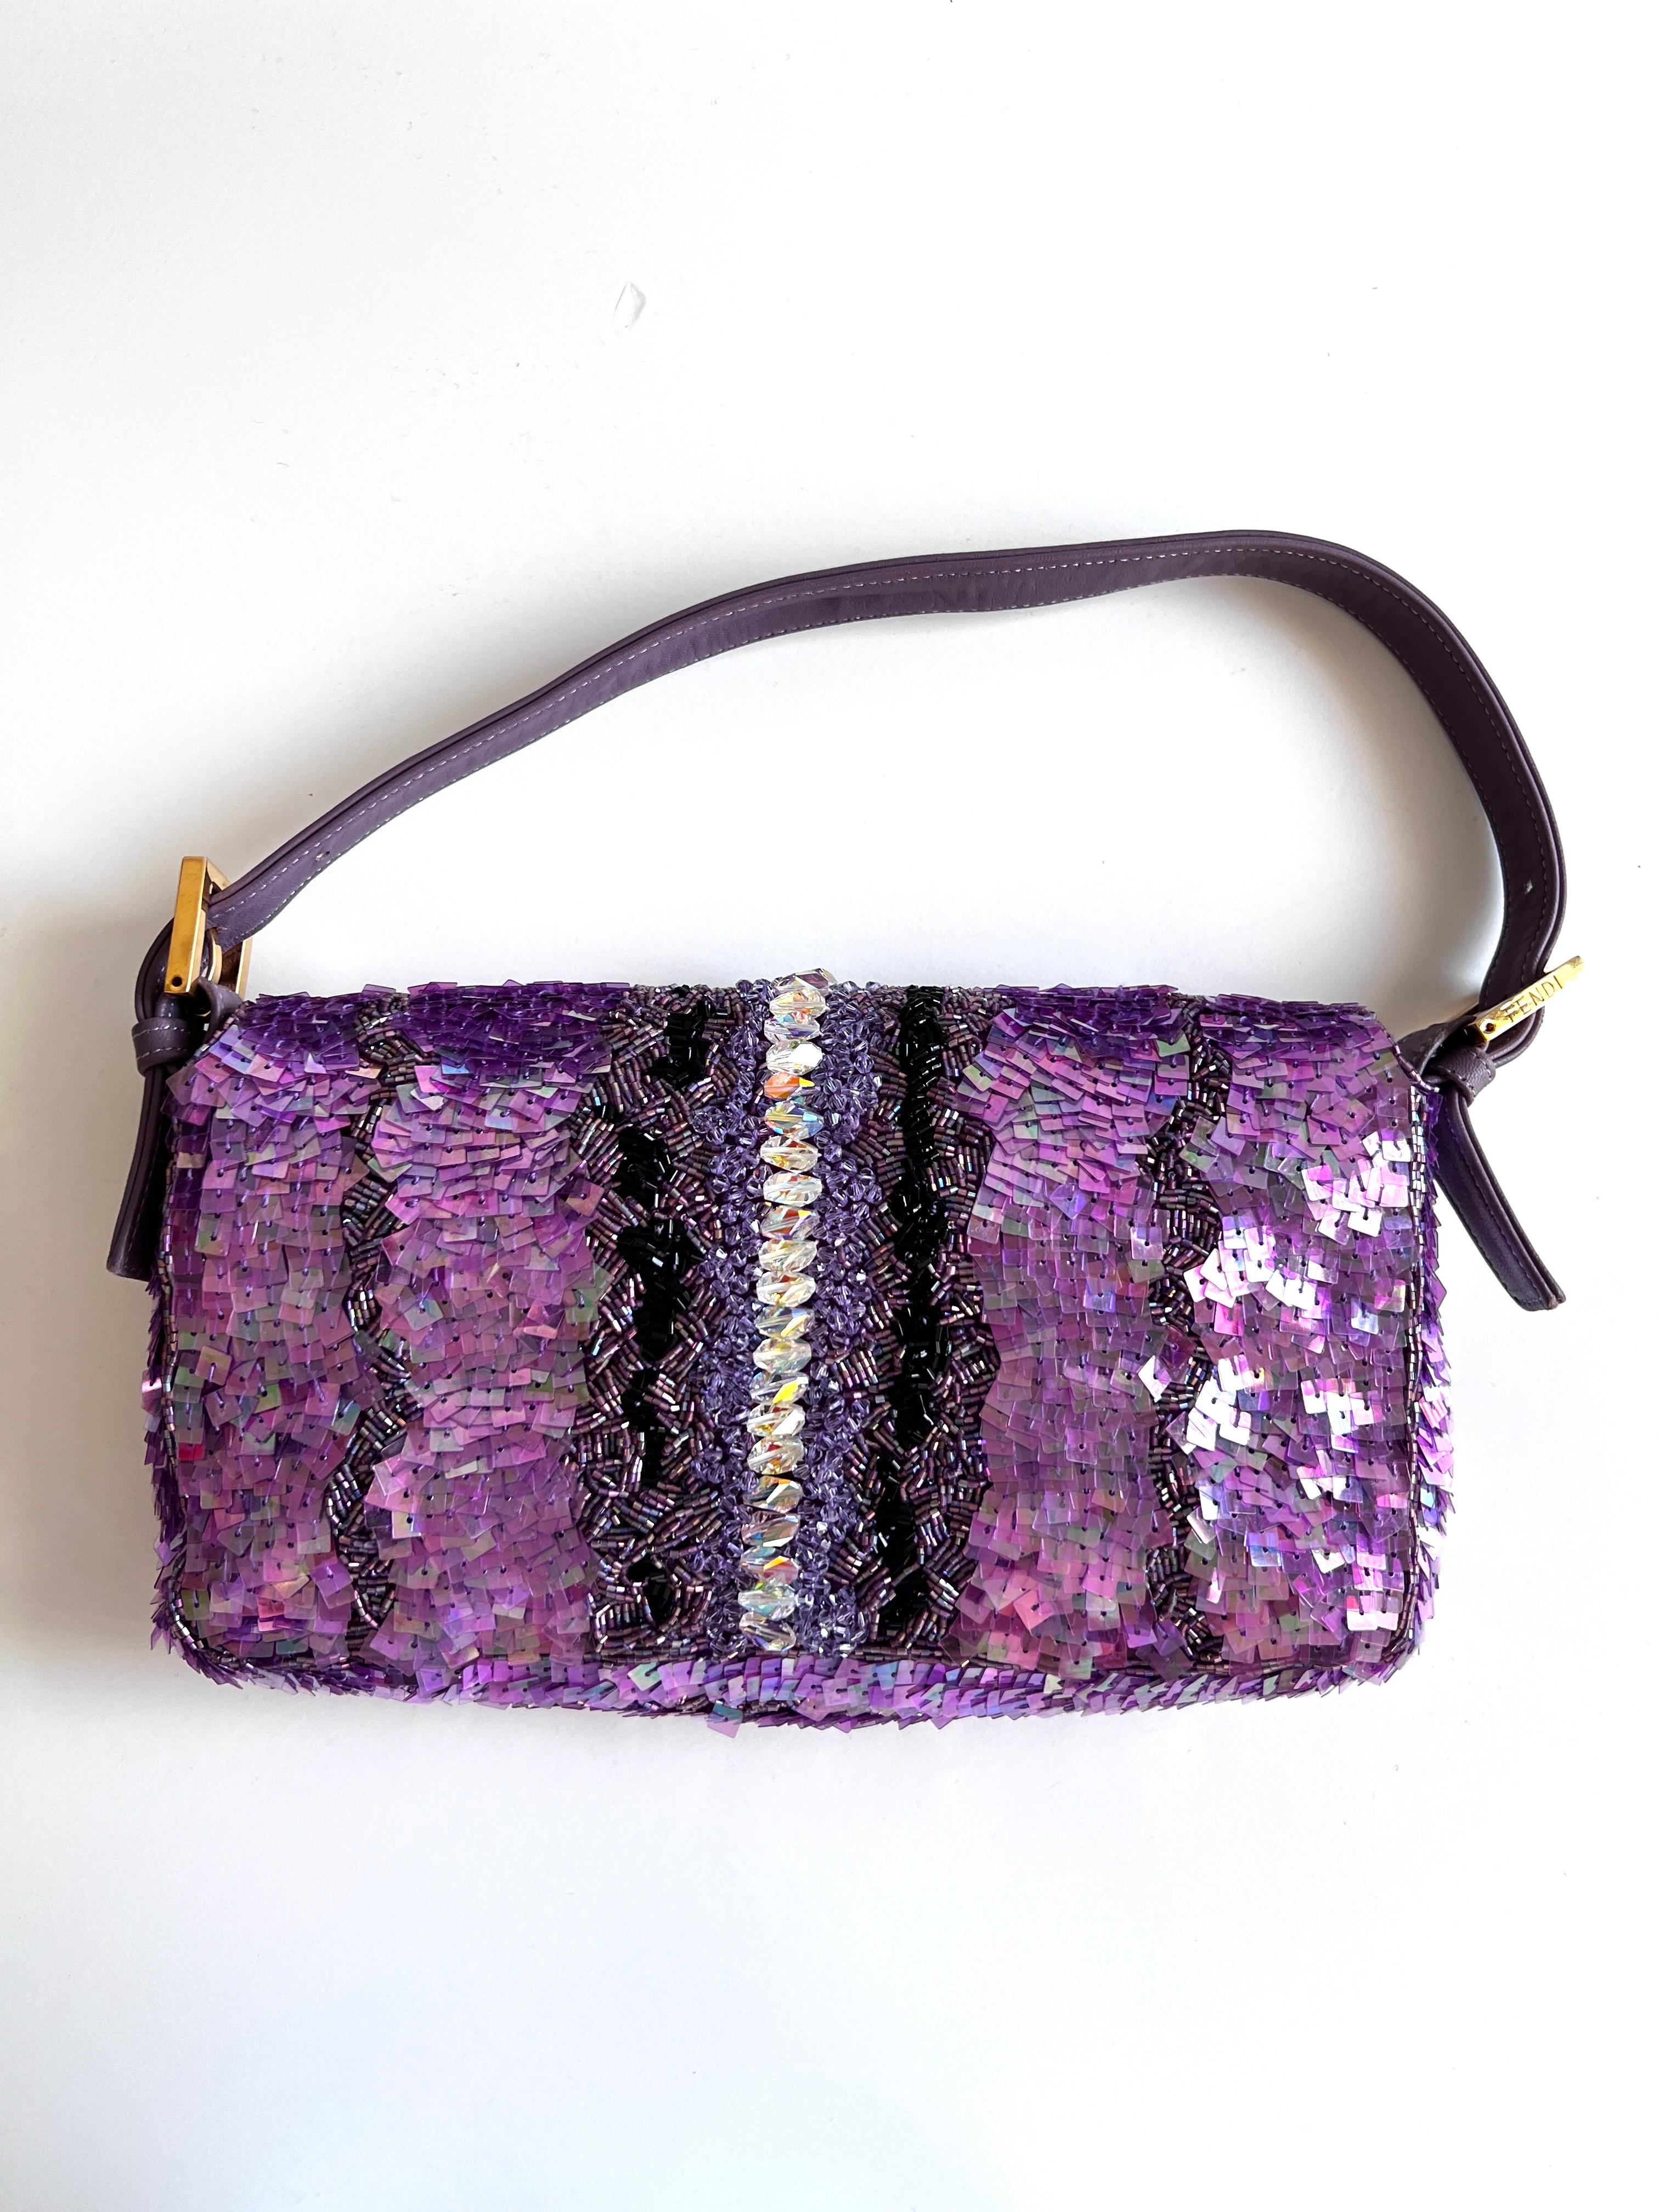 Extremely rare Vintage Fendi purple sequin with rhinestone baugette 1